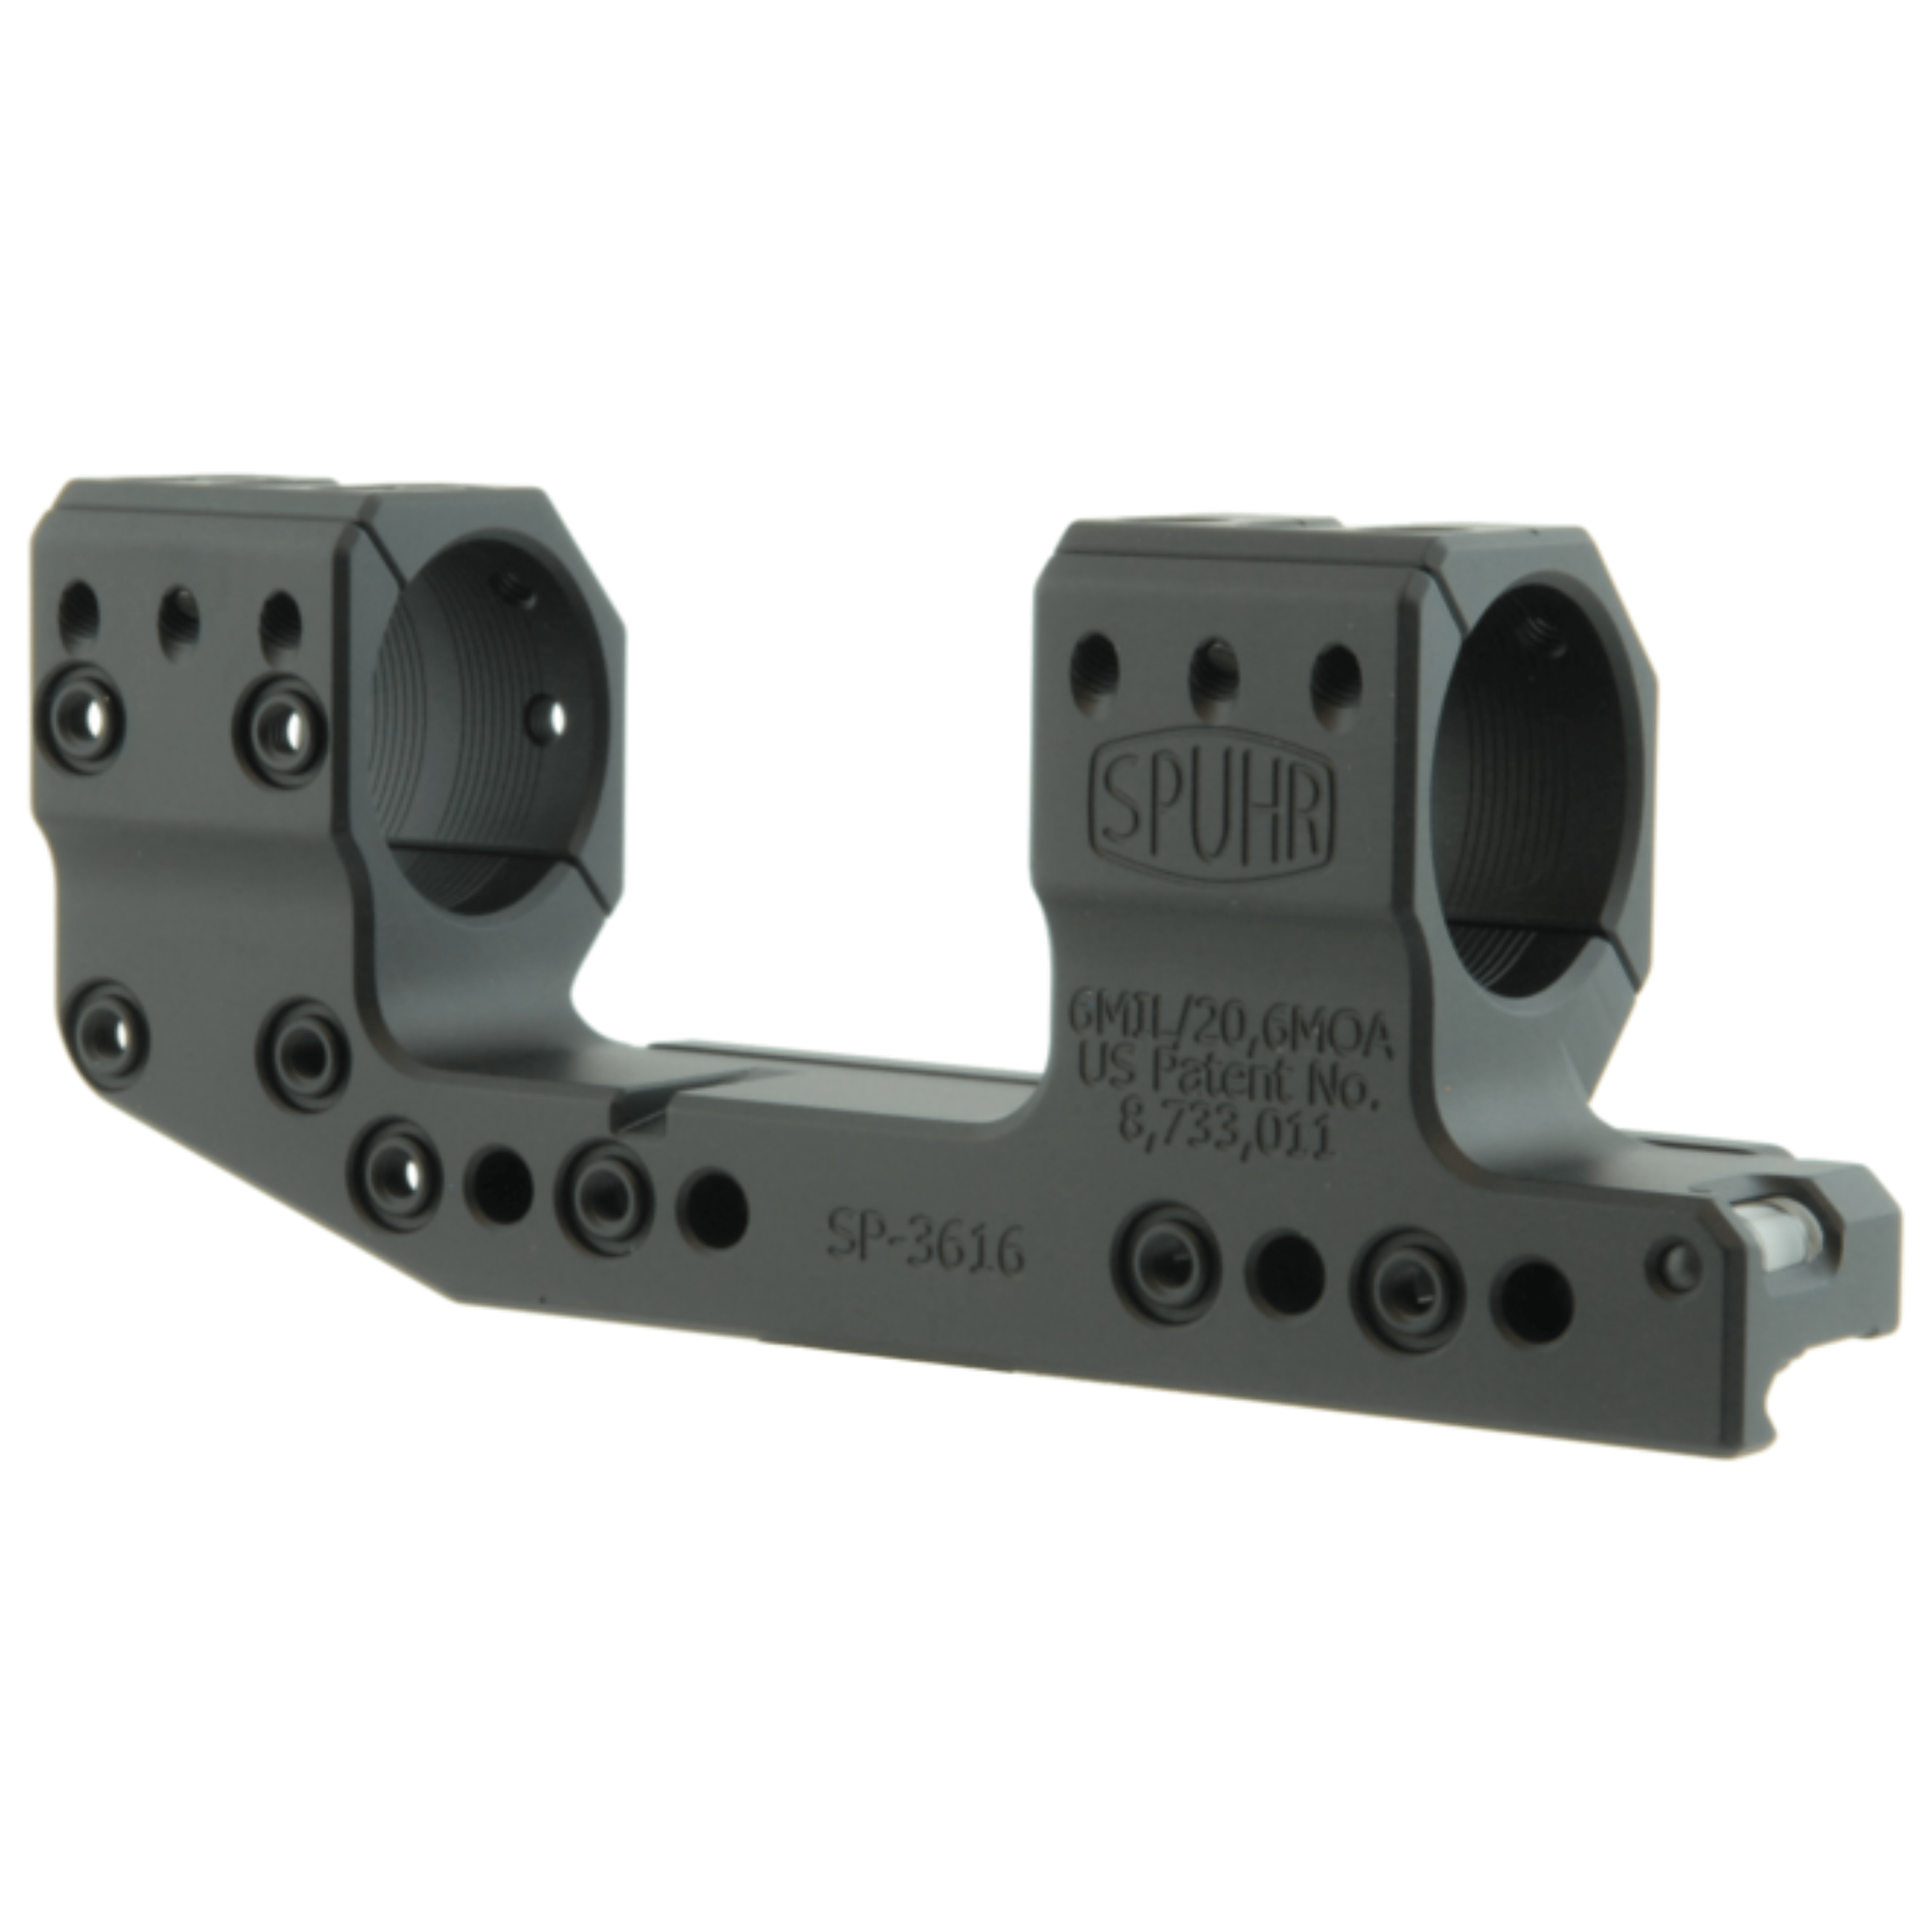 Spuhr Ø30 H38mm 20.6MOA offset mounting 